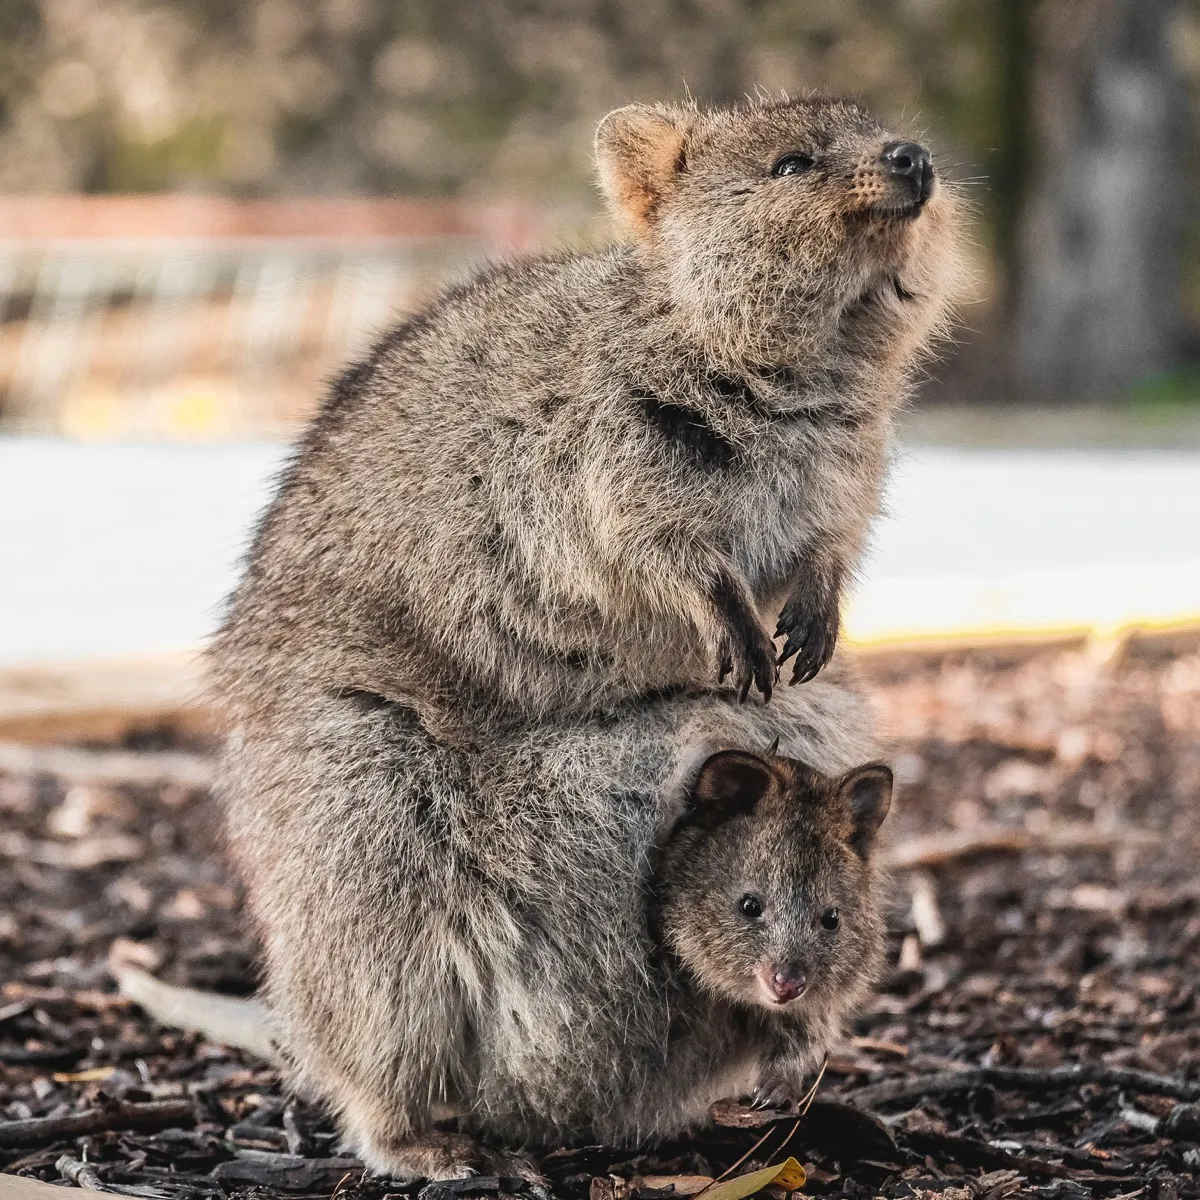 quokka baby in pouch